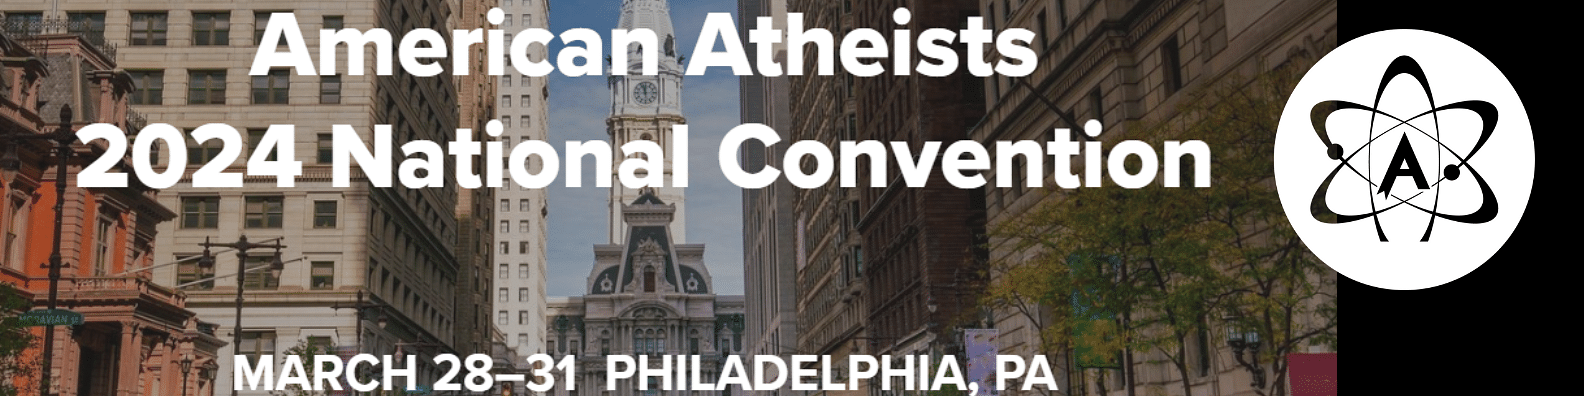 American Atheists 2024 National Convention in Philadelphia March 28-31